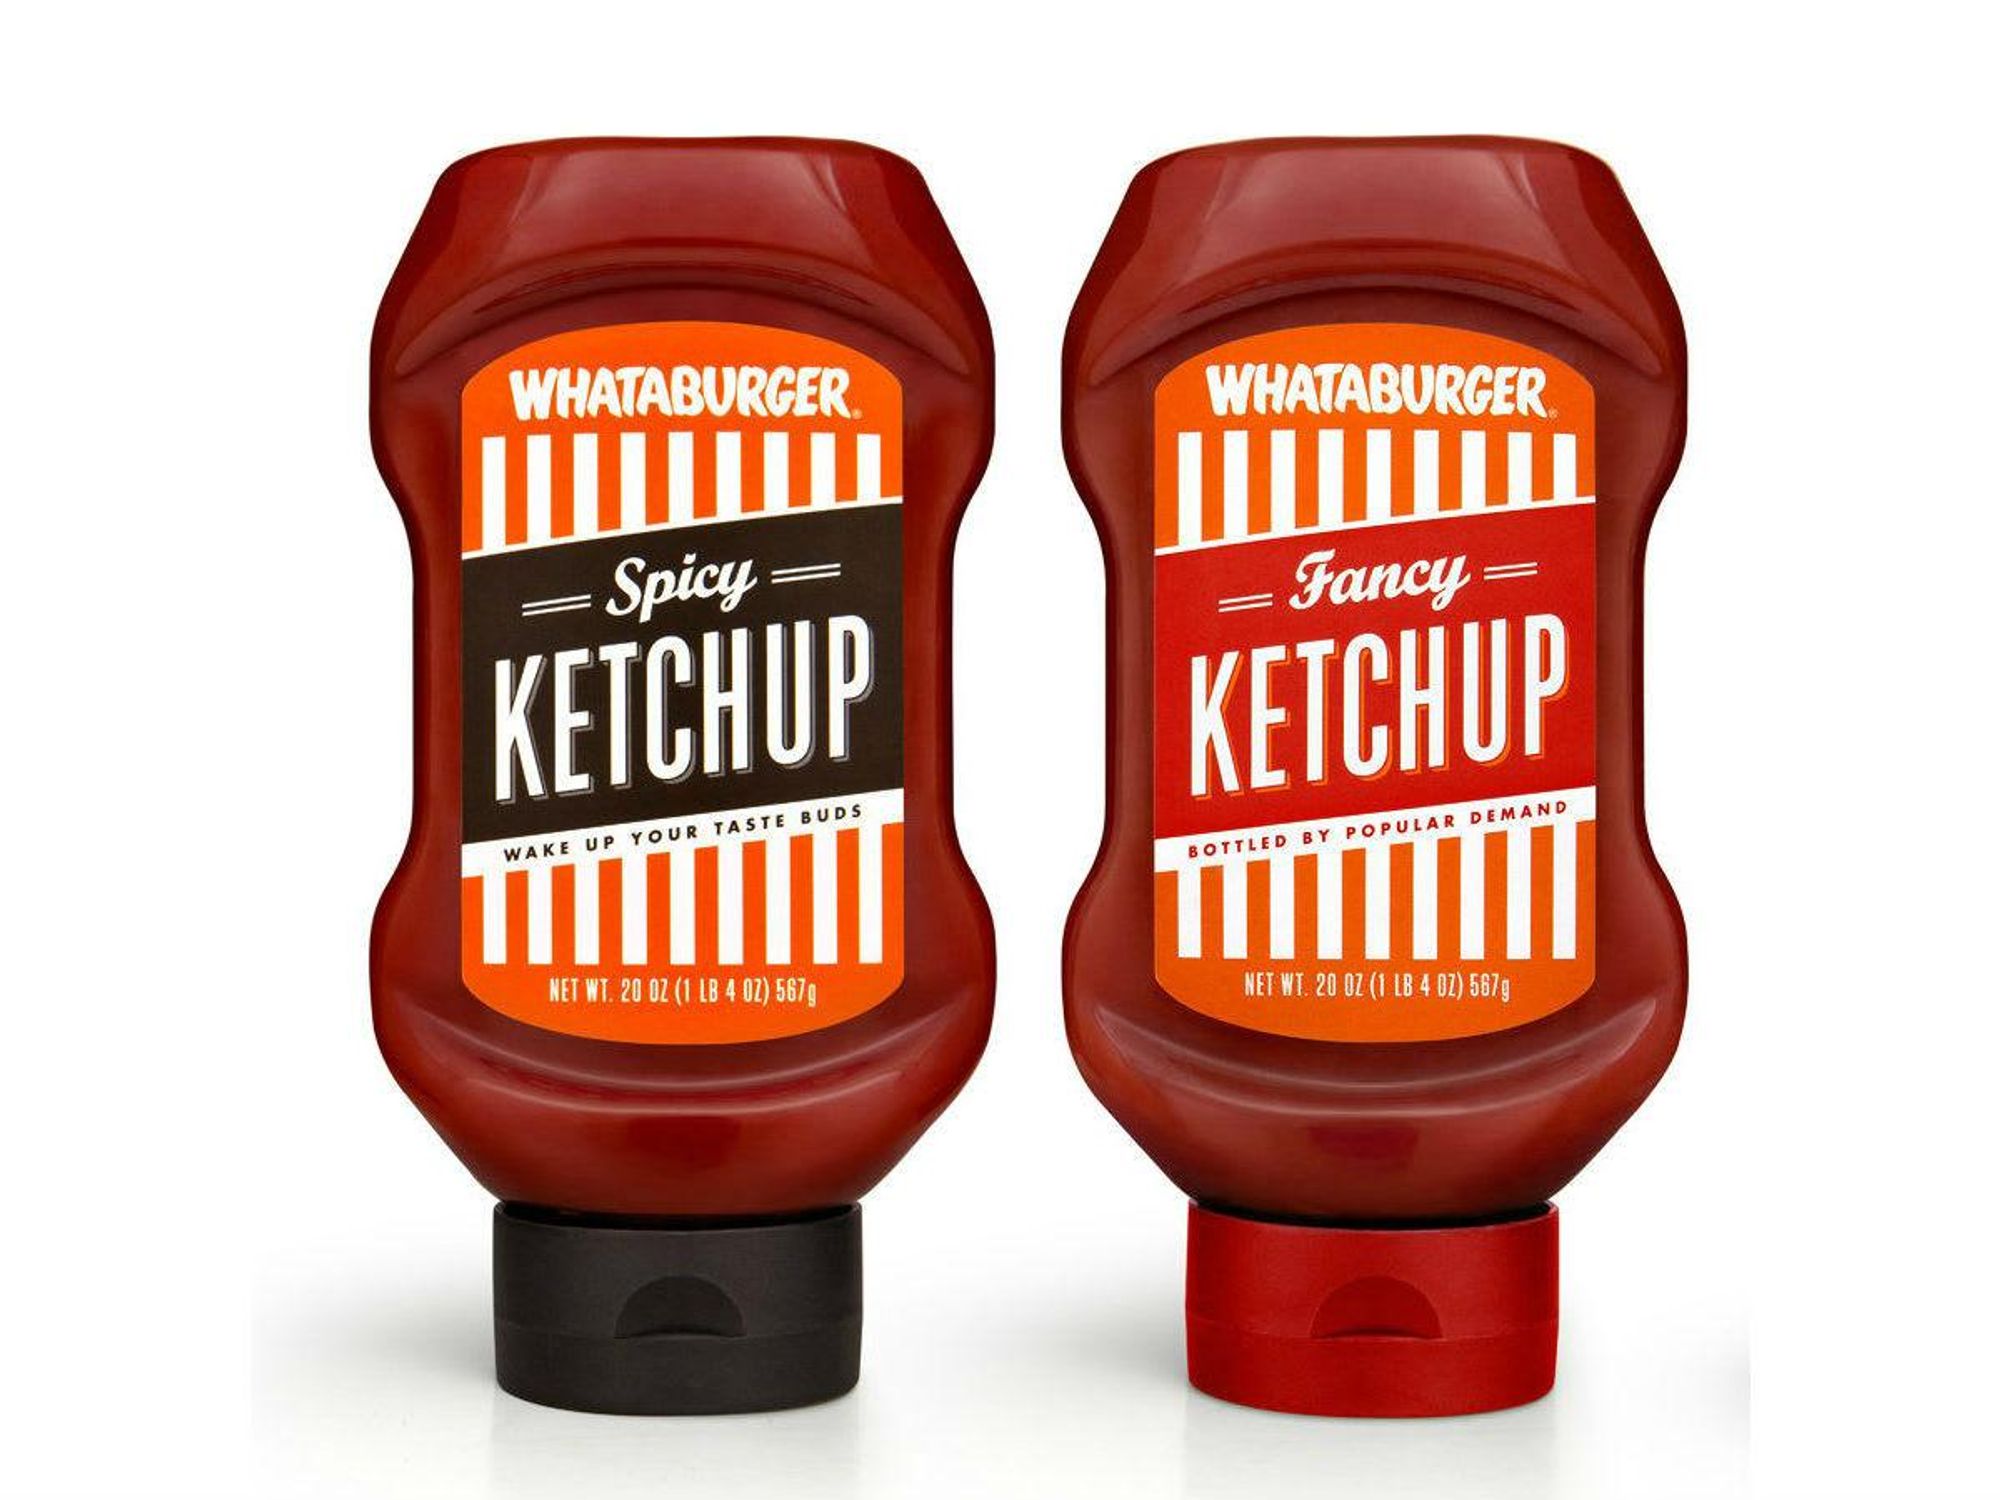 Whataburger spicy and fancy ketchup